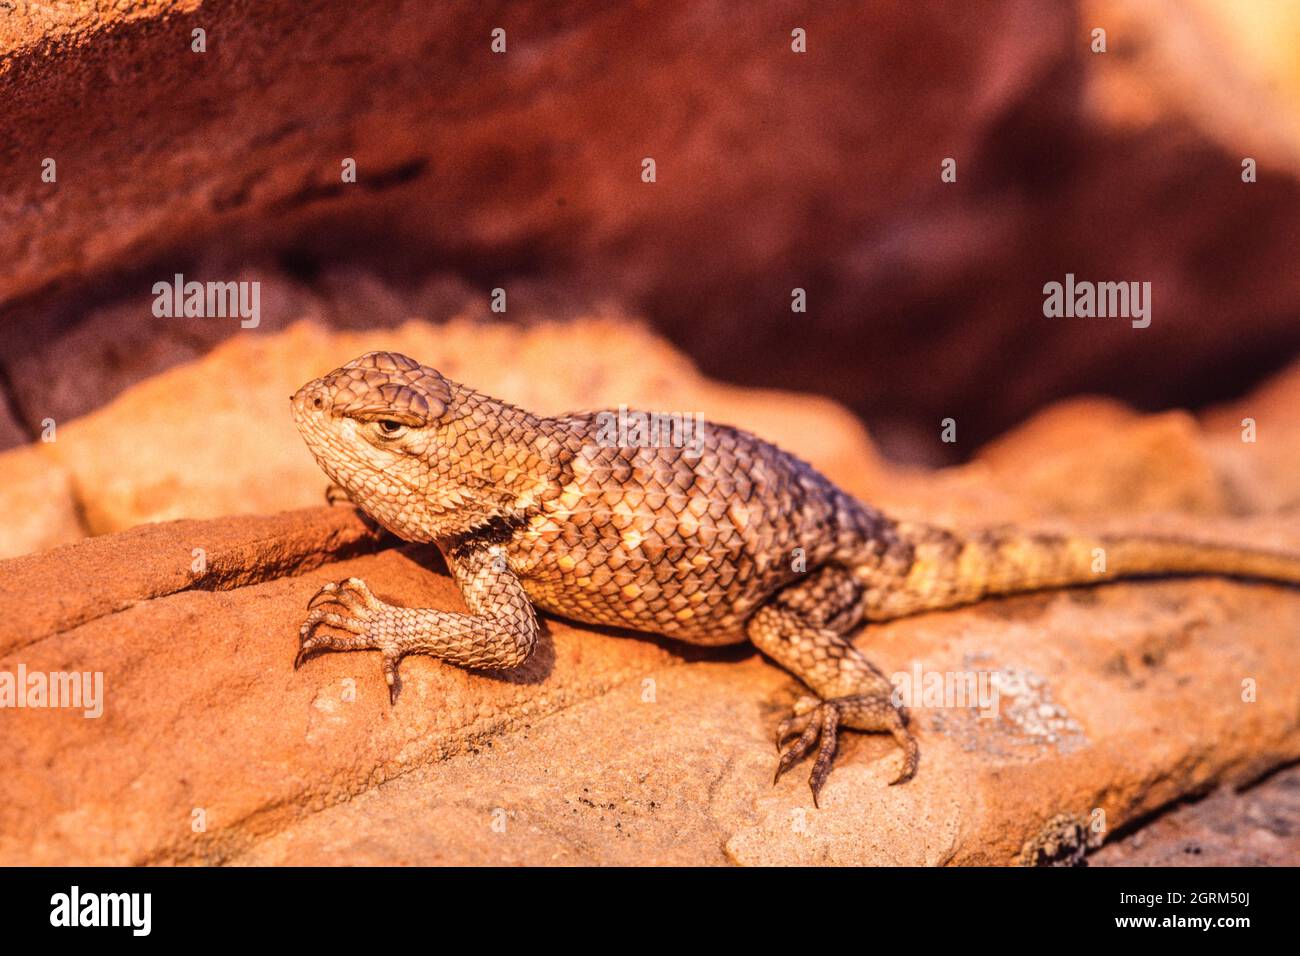 A Desert Spiny Lizard, Sceloporus magister, basking in the sun to regulate its body temperature.  Utah. Stock Photo